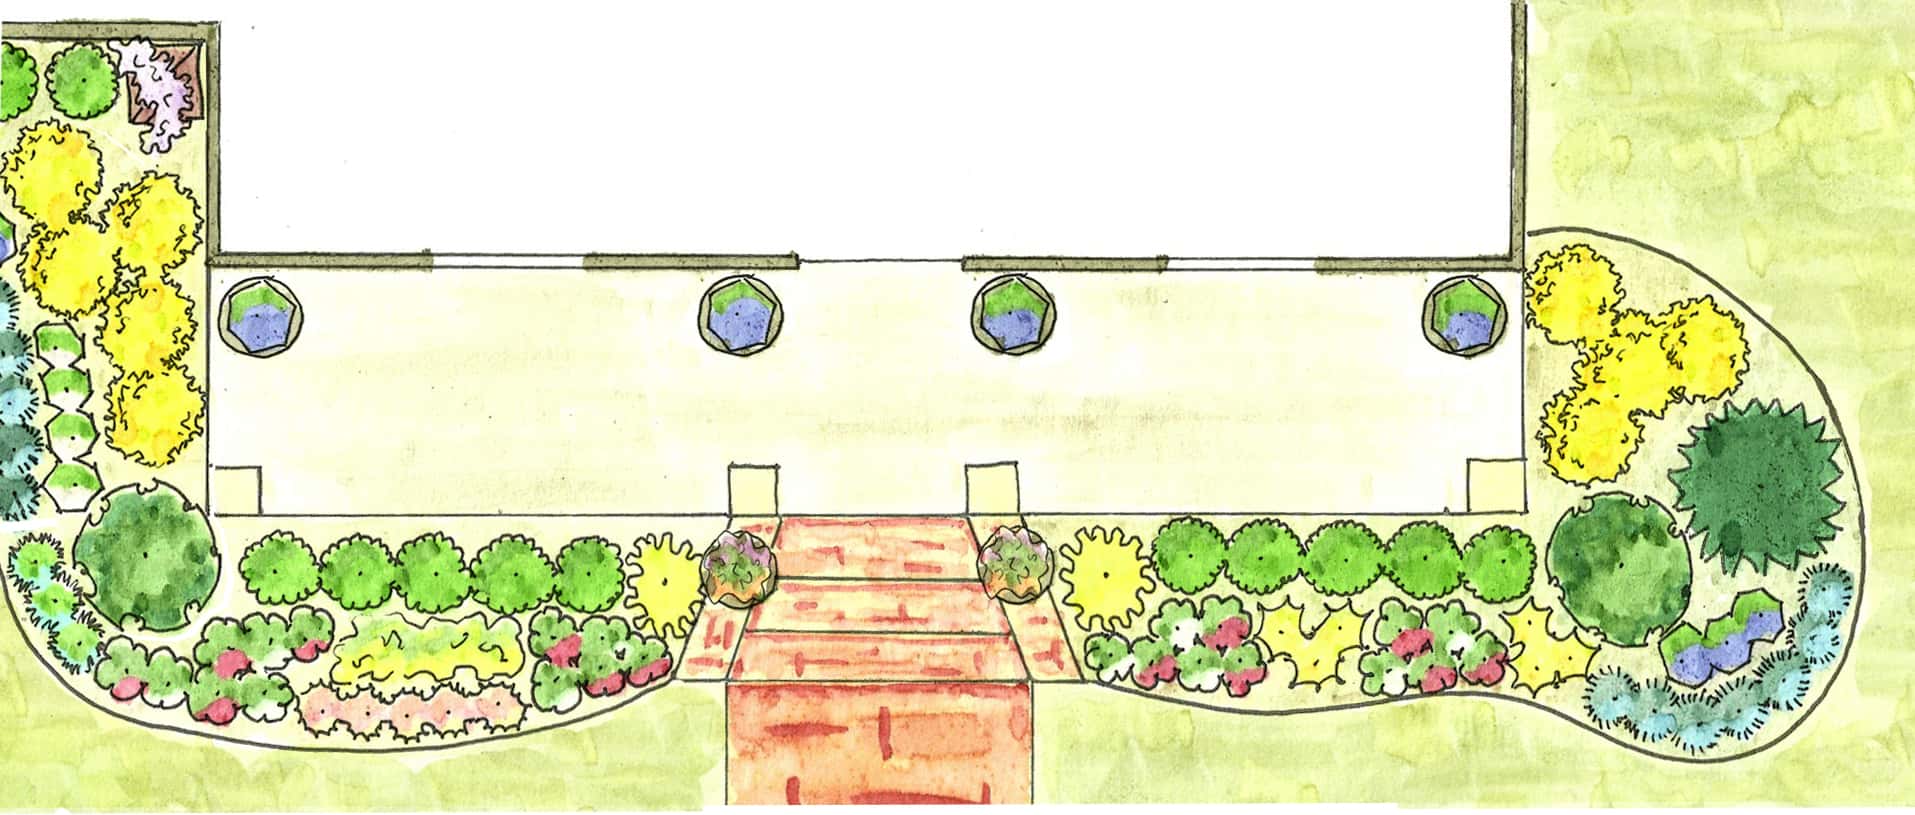 Landscape architect pencil drawing of landscape to be planted with Southern Living plants